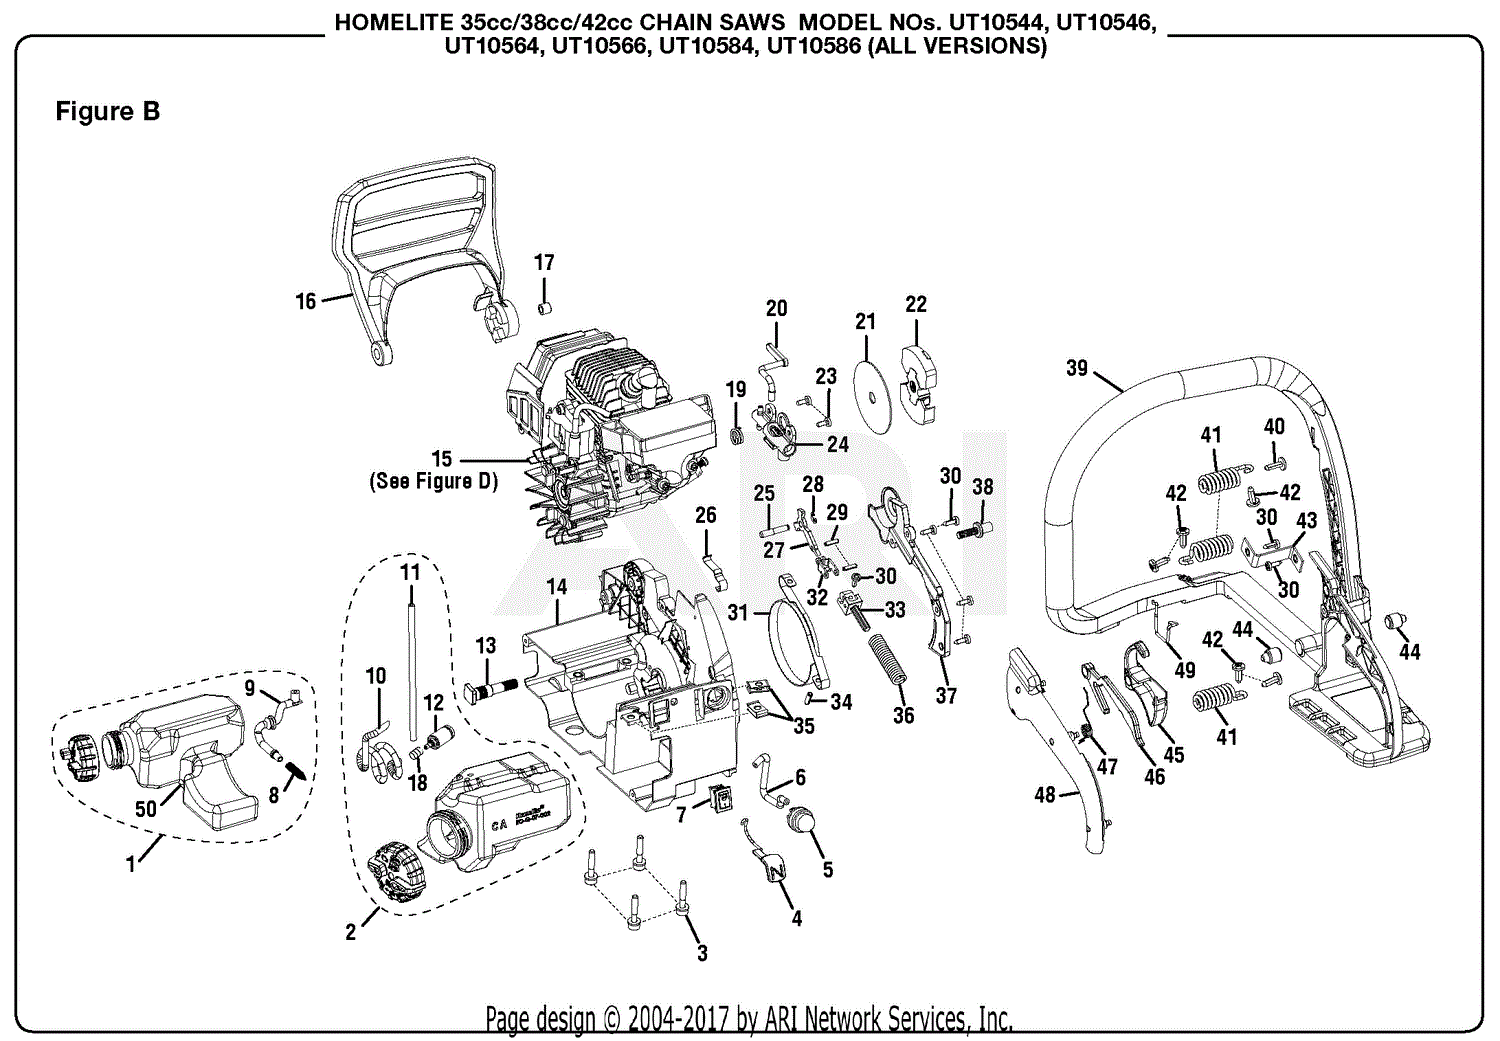 Homelite UT10564 16 in. 38cc Chain Saw Parts Diagram for Figure B